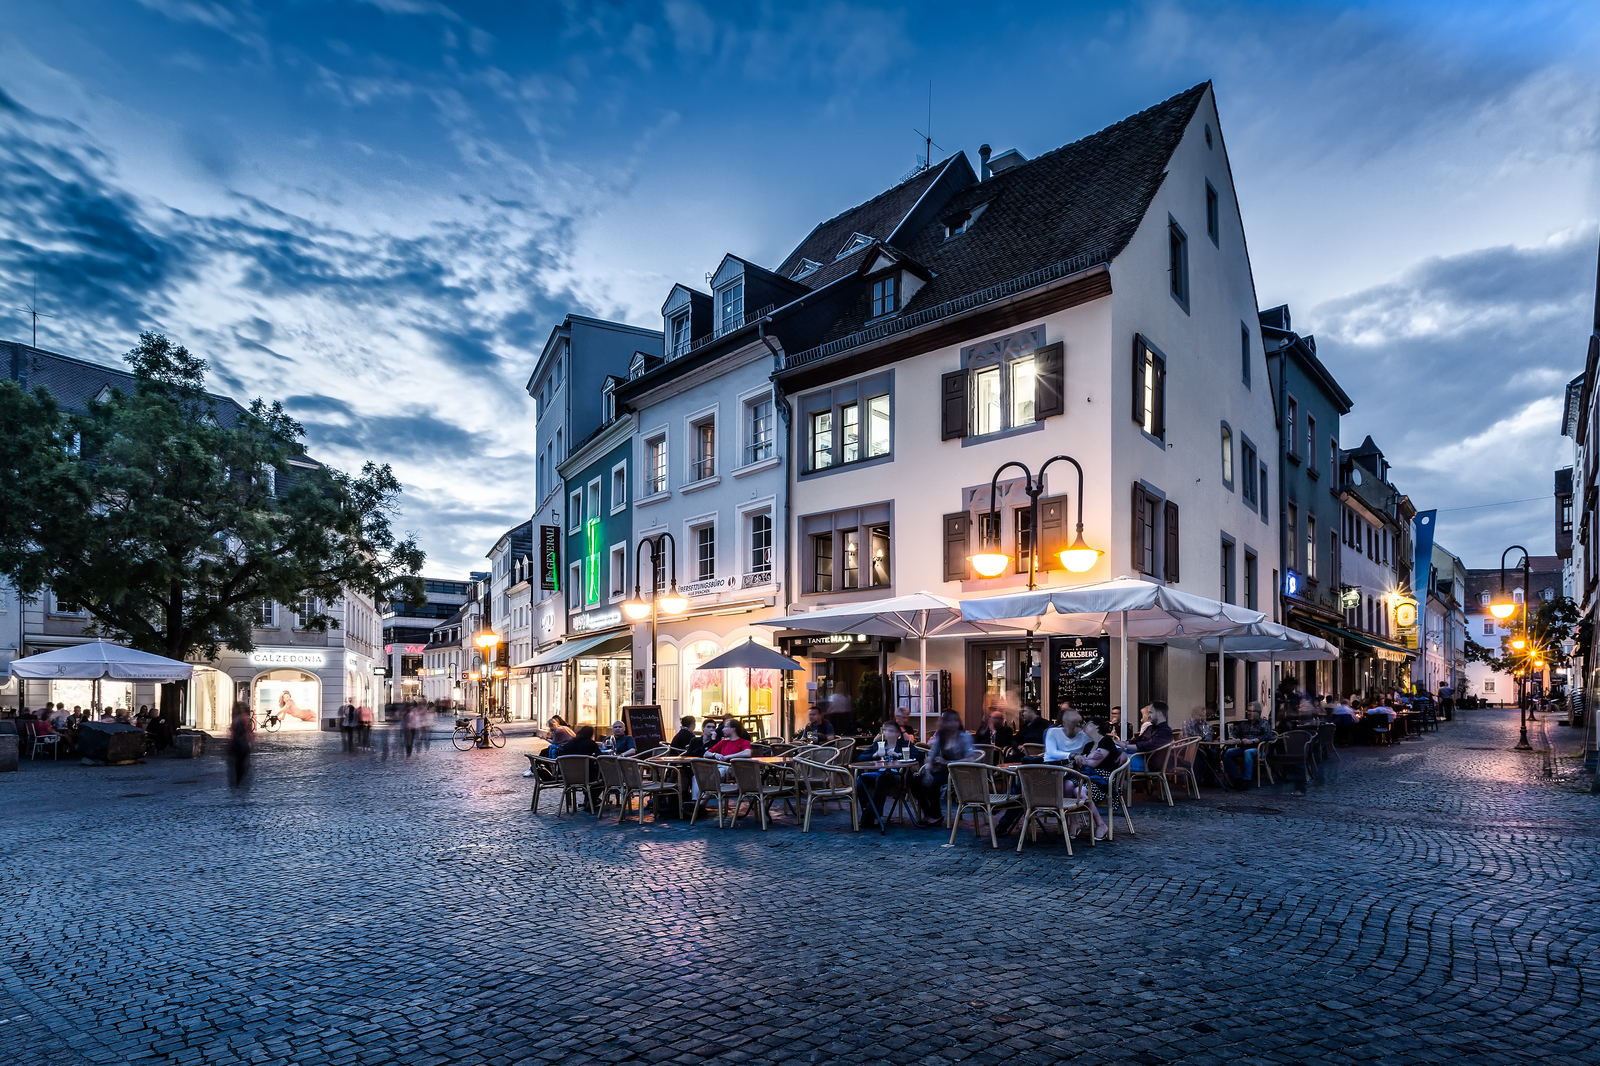 View of the Tante Maja restaurant on St. Johanner Markt in the evening